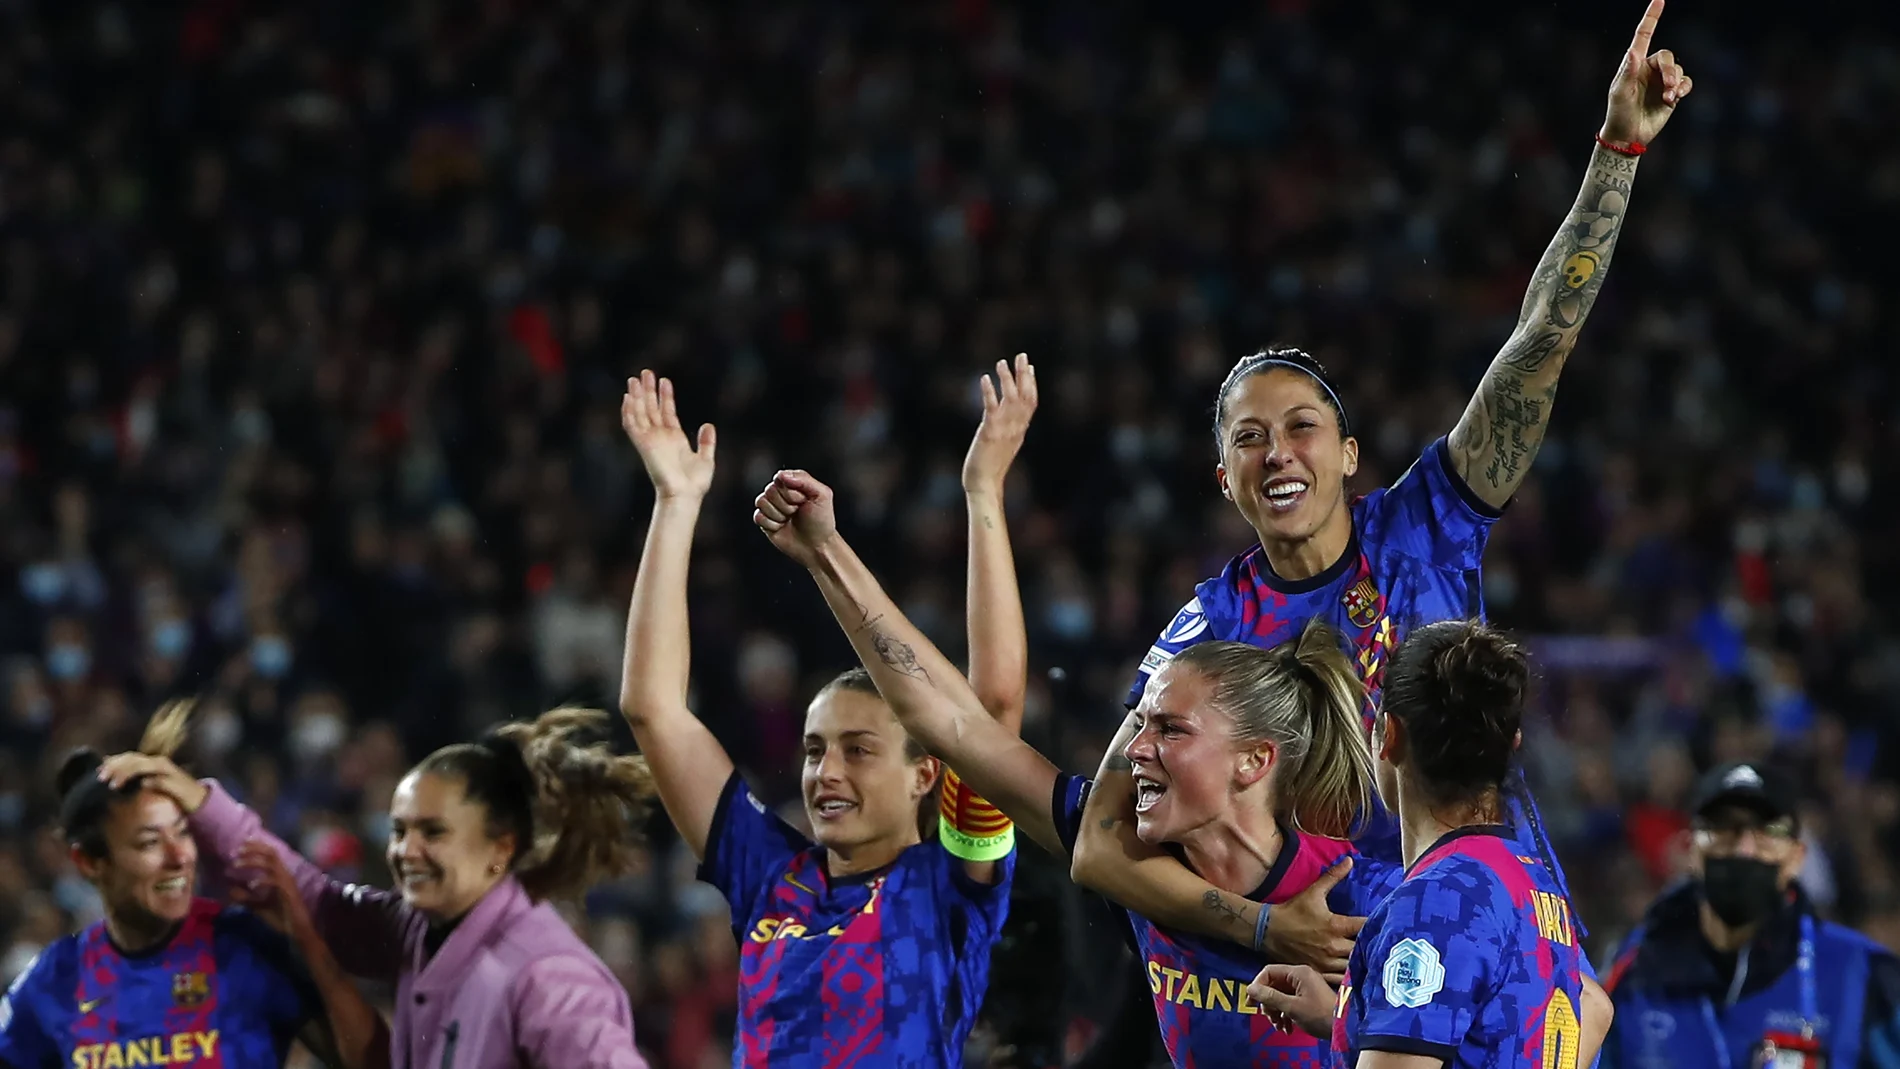 Barcelona players celebrate their win against Real Madrid during the Women's Champions League quarter final, second leg soccer match between Barcelona and Real Madrid at Camp Nou stadium in Barcelona, Spain, on March 30, 2022. Ada Hegerbergâ€™s comeback season has her and her Lyon teammates back in yet another Womenâ€™s Champions League final. The seven-time champions will face defending titlist Barcelona in Turin on Saturday in a repeat of the 2019 final.